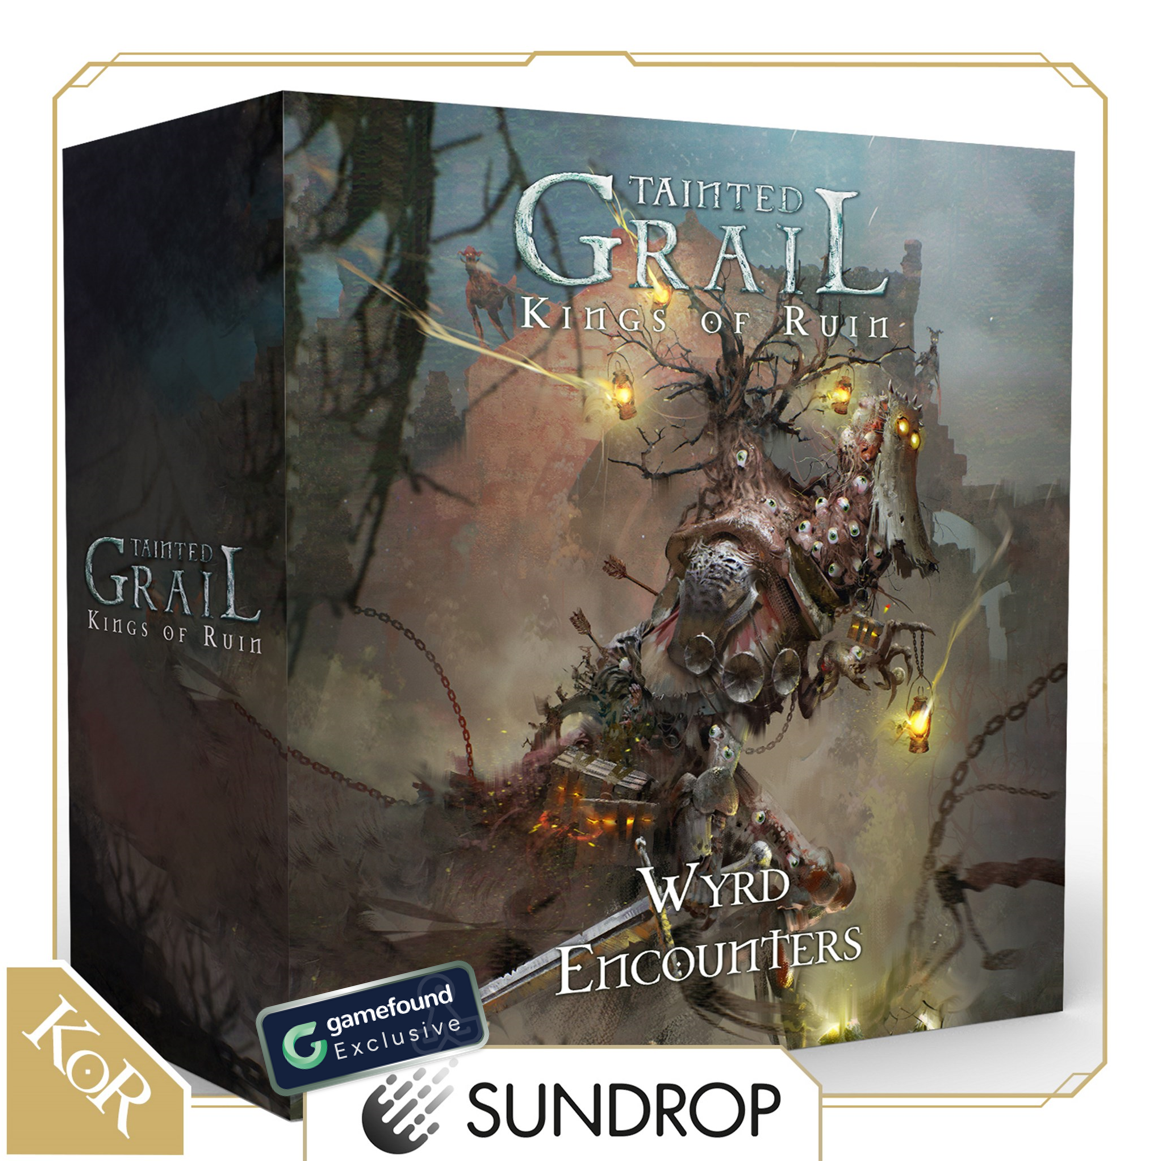 Gamefound Exclusive Tainted Grail: Kings of Ruin Wyrd Encounters Expansion, Sundrop Edition